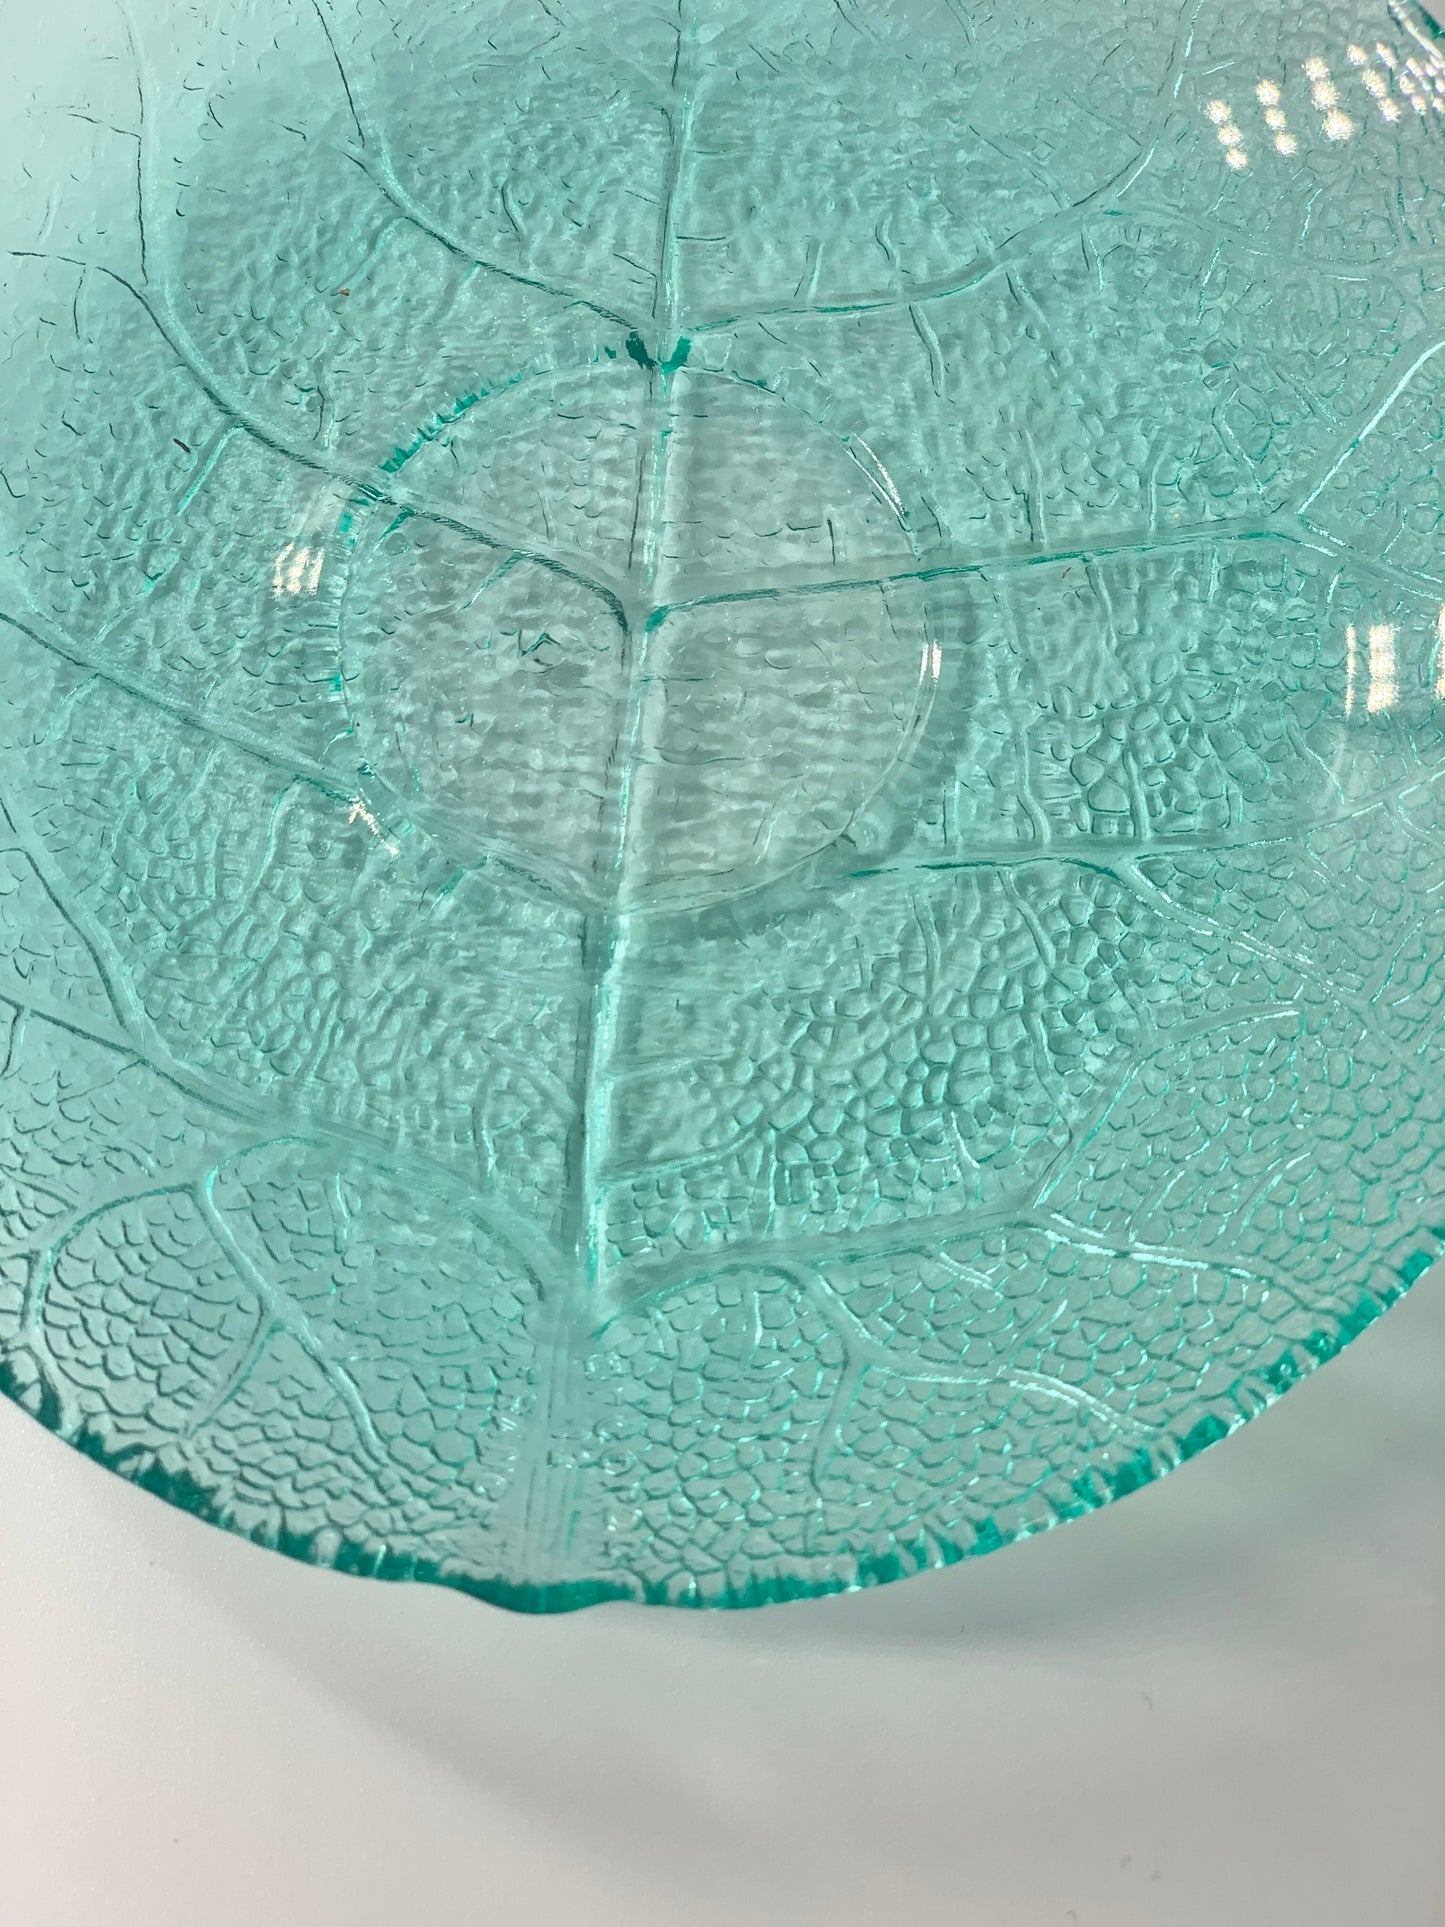 Retro textured leaf pattern teal glass Arcoroc tea cup and saucer